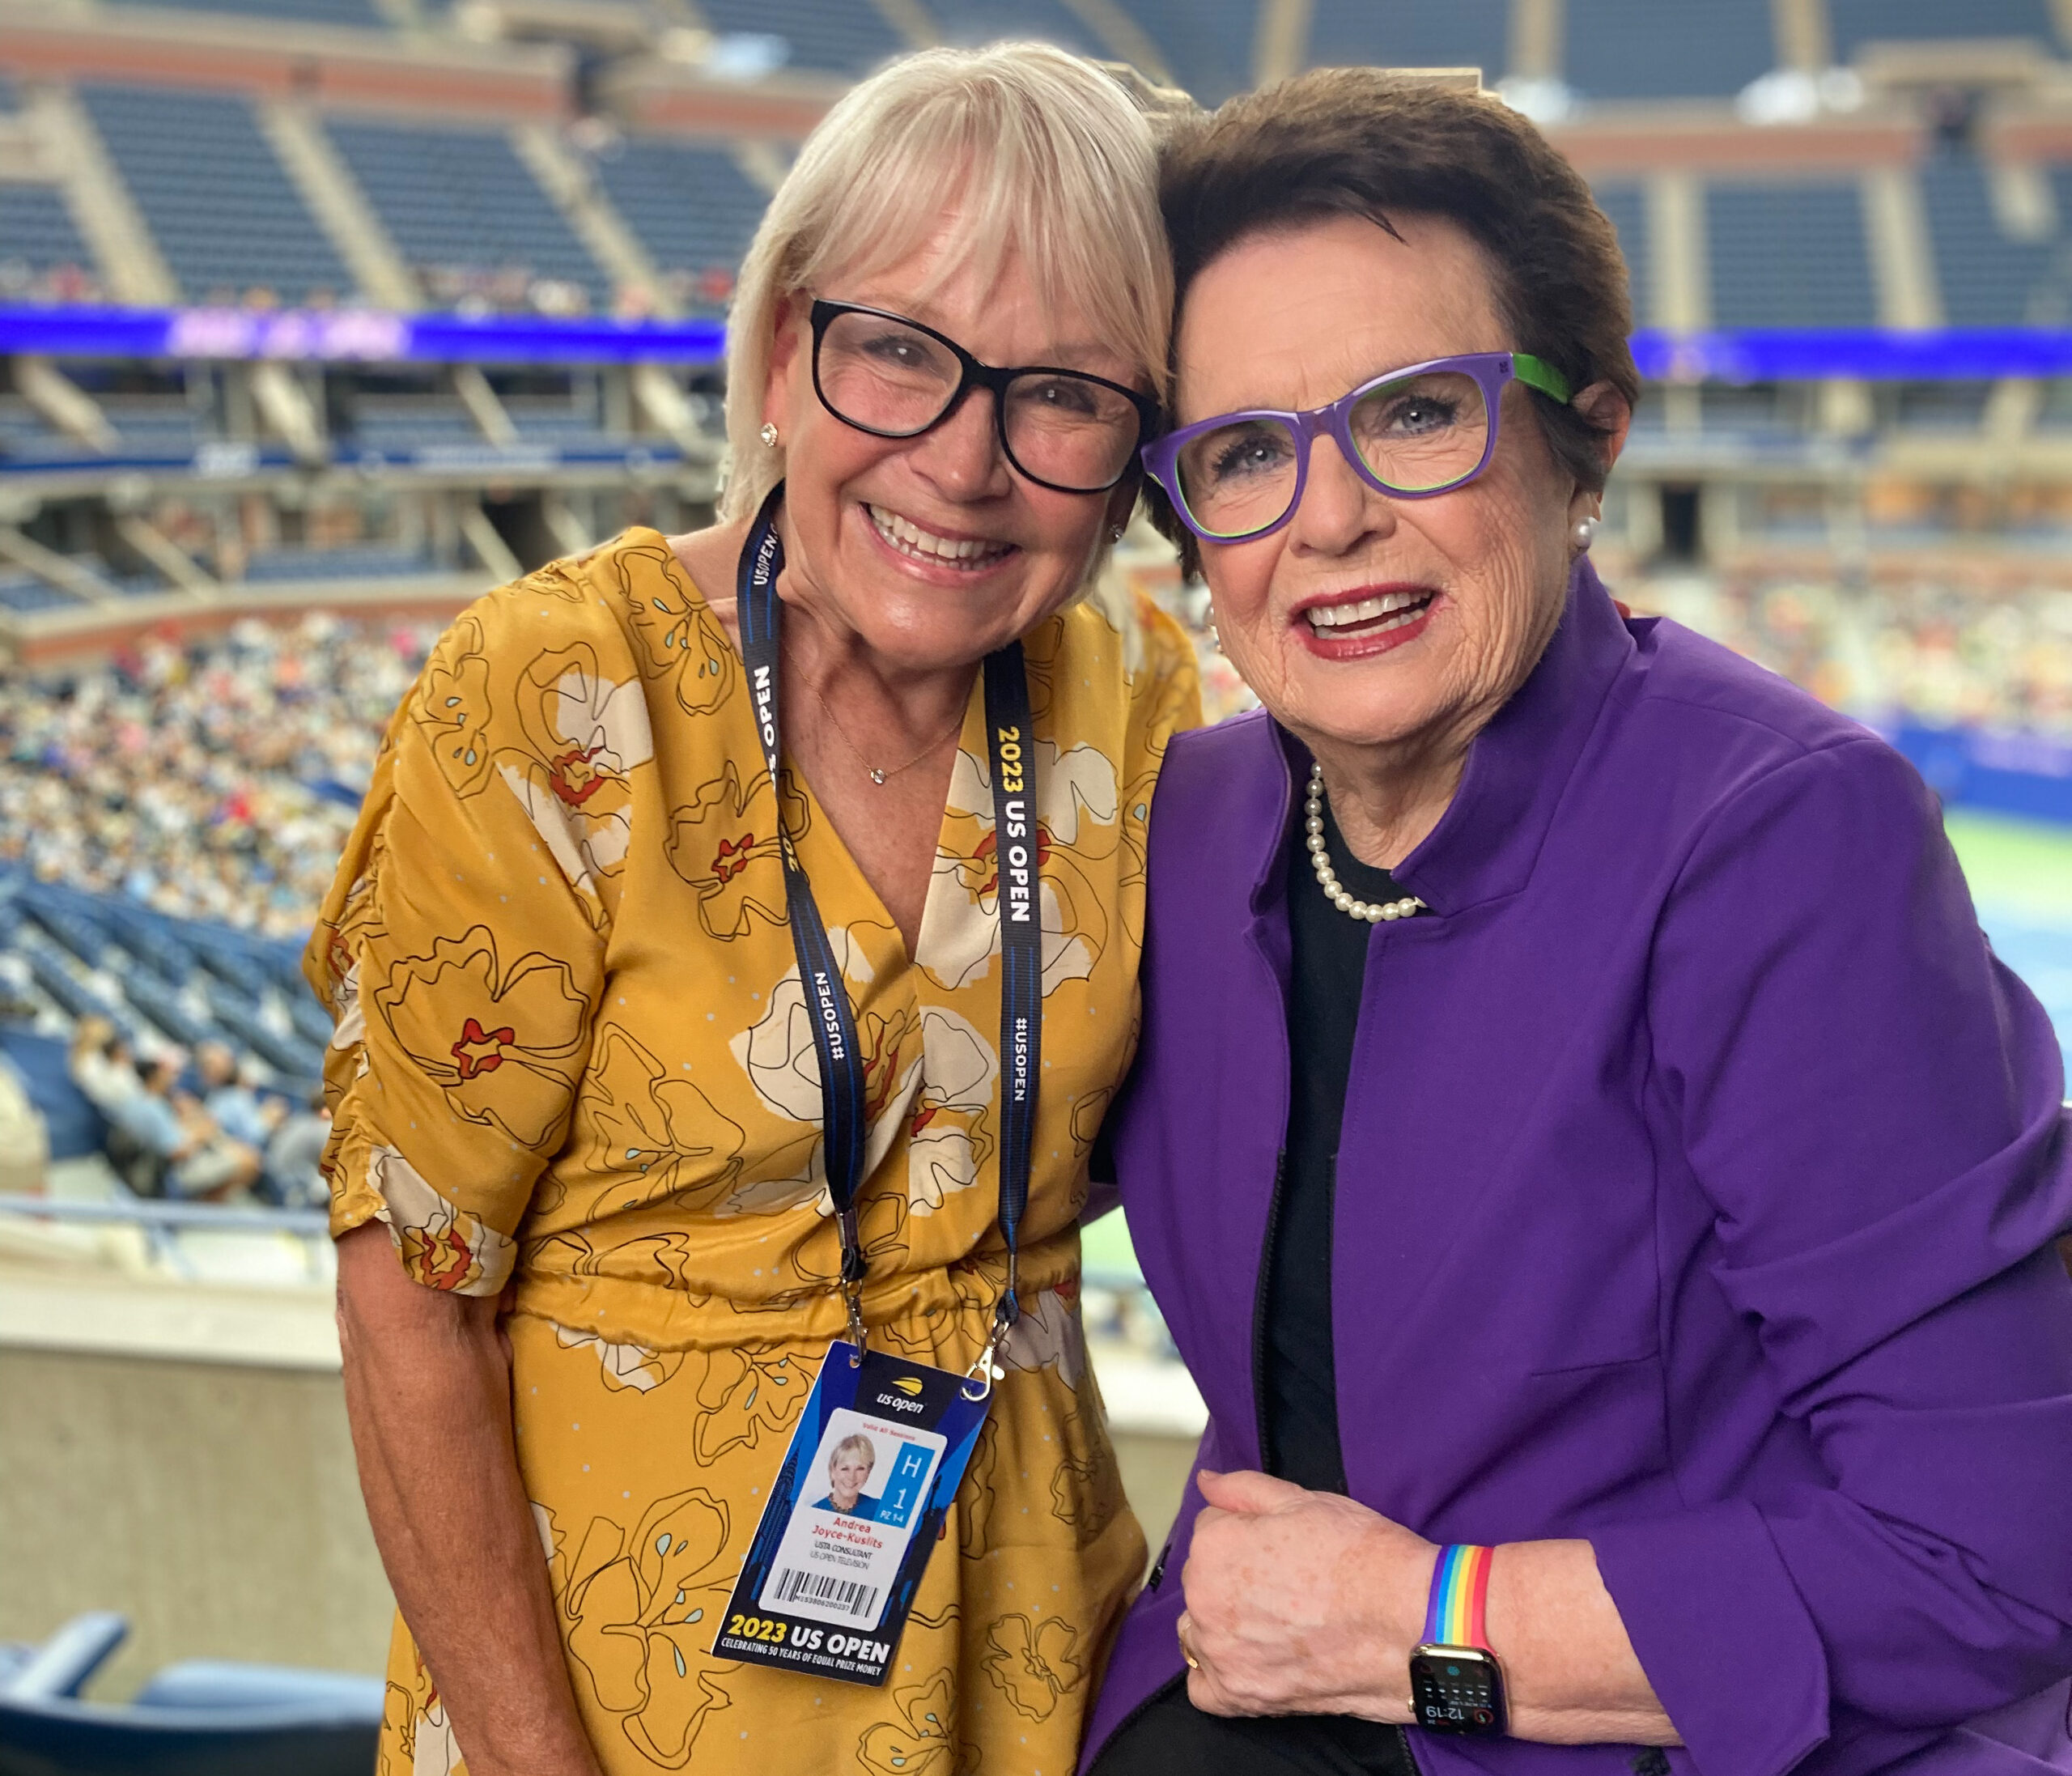 Joyce, left, in a yellow dress, poses with her arm around Billie Jean King, right, who is wearing a black top and purple dress jacket.